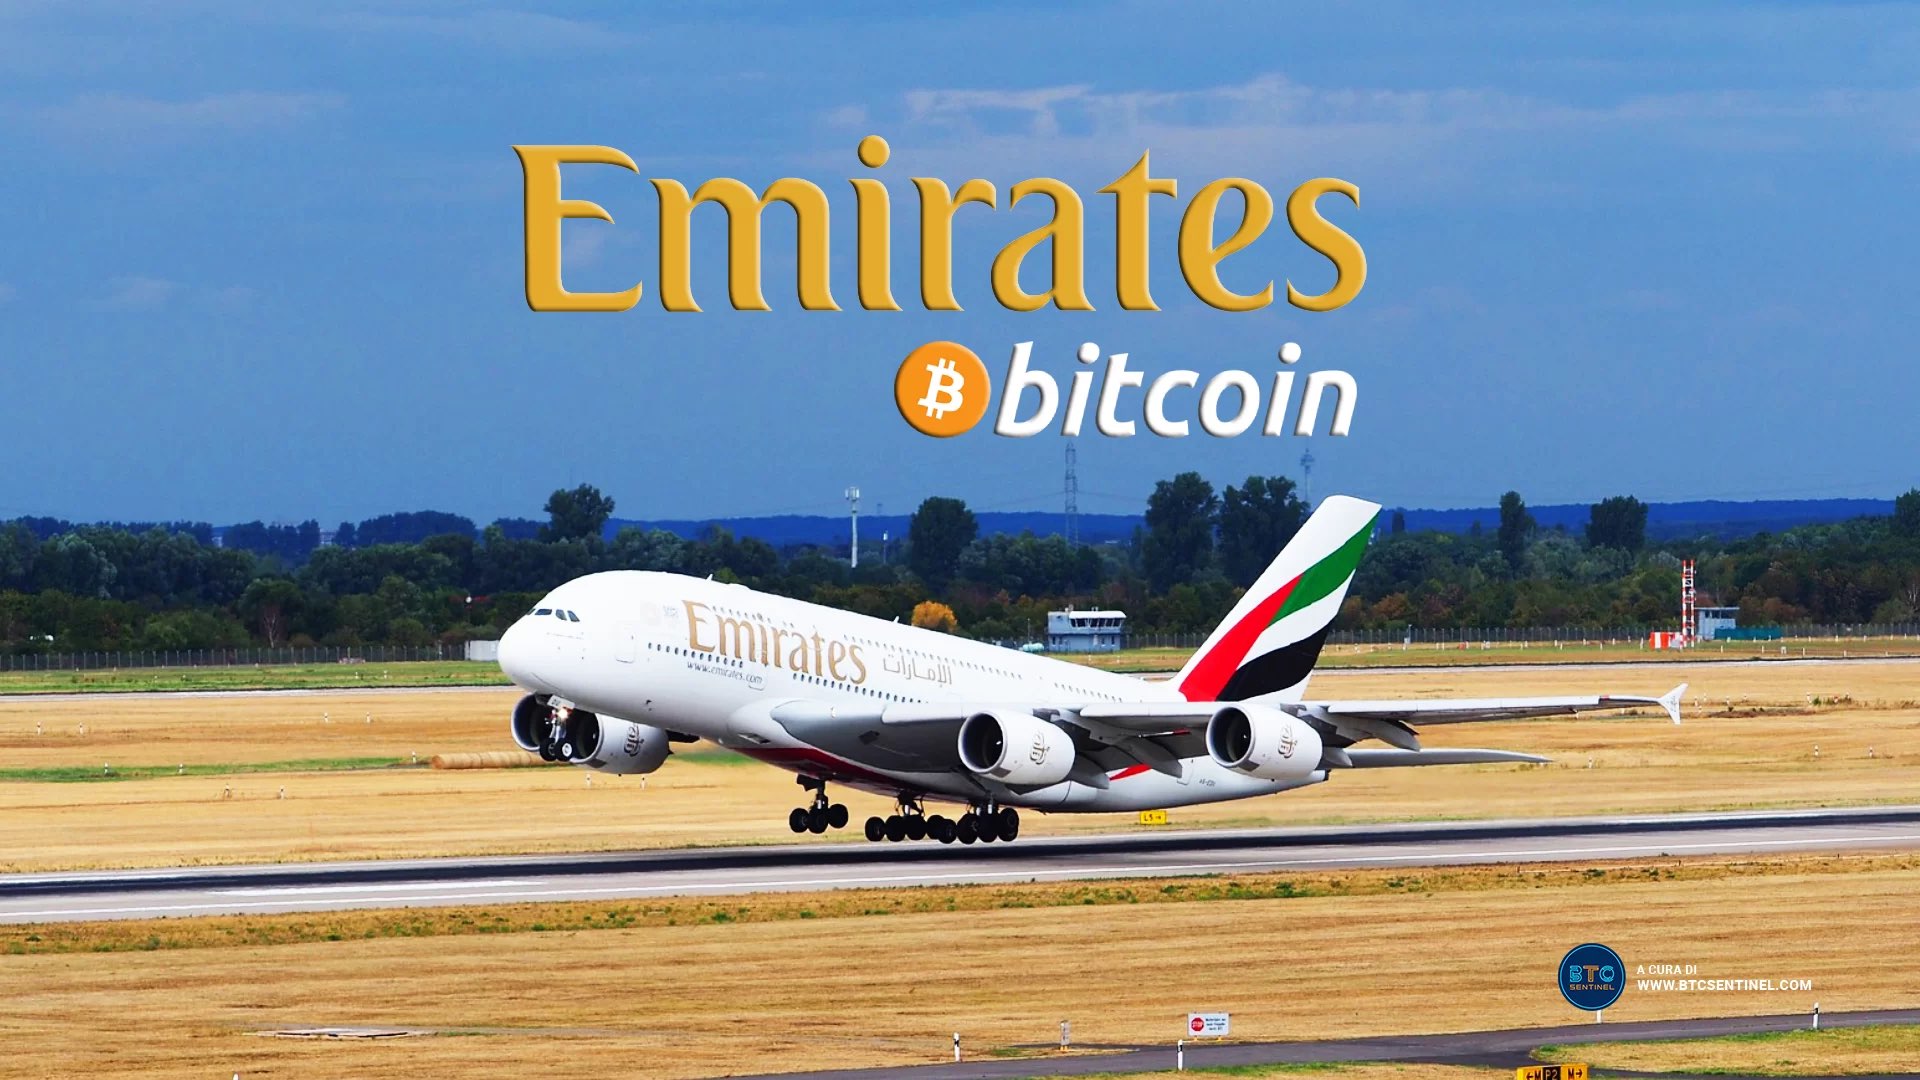 Bitcoin To The Moon? No, To The Sky con Emirates!